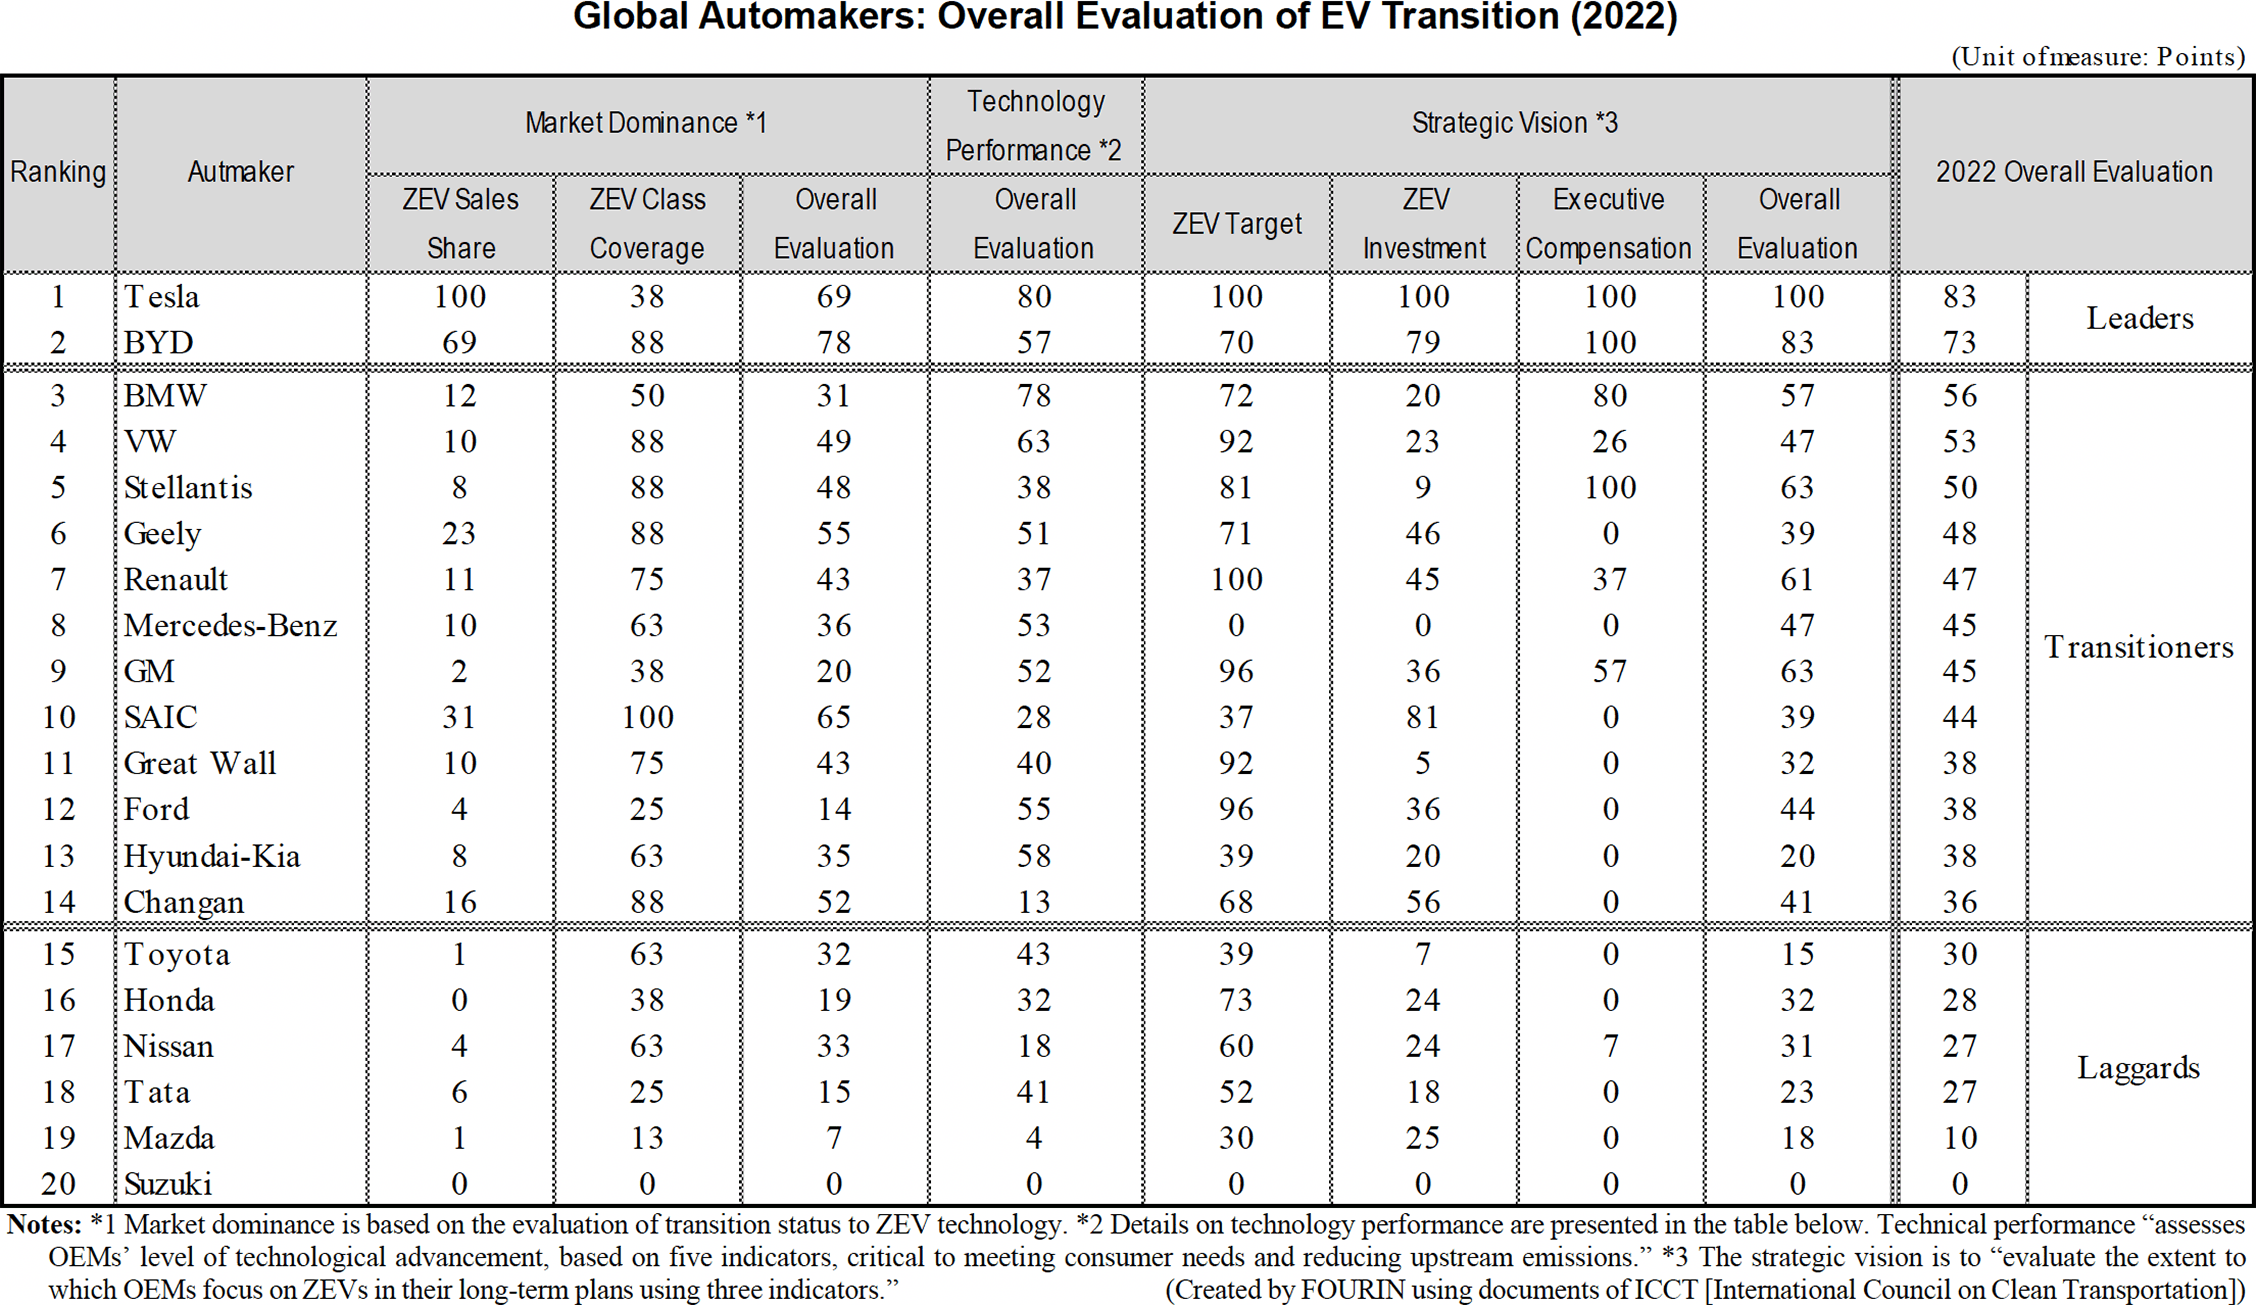 Table data: Global Automakers: Overall Evaluation of EV Transition (2022)